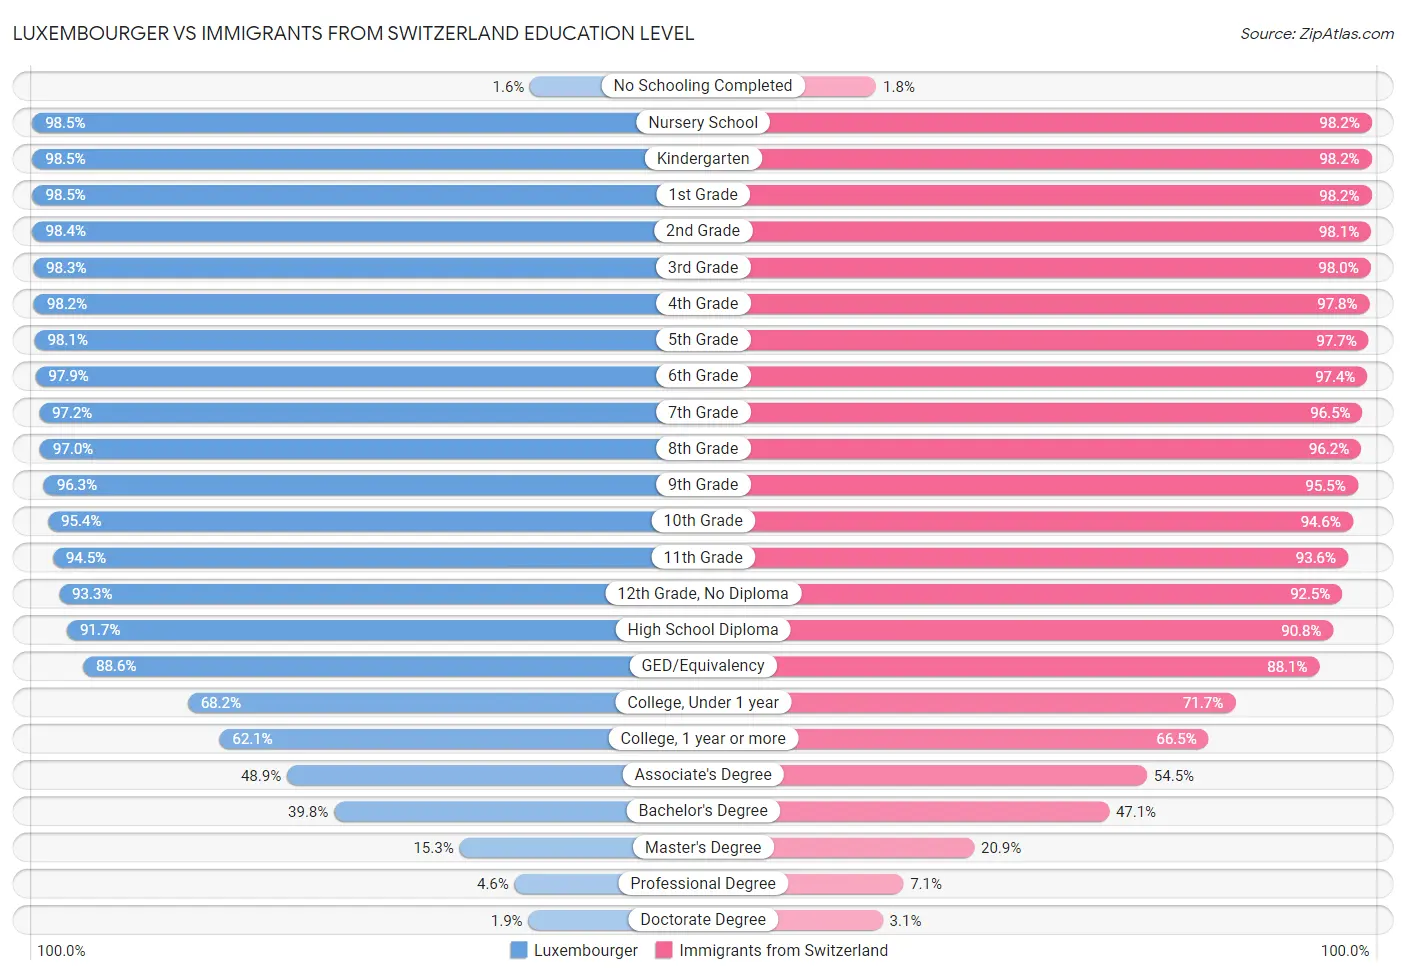 Luxembourger vs Immigrants from Switzerland Education Level